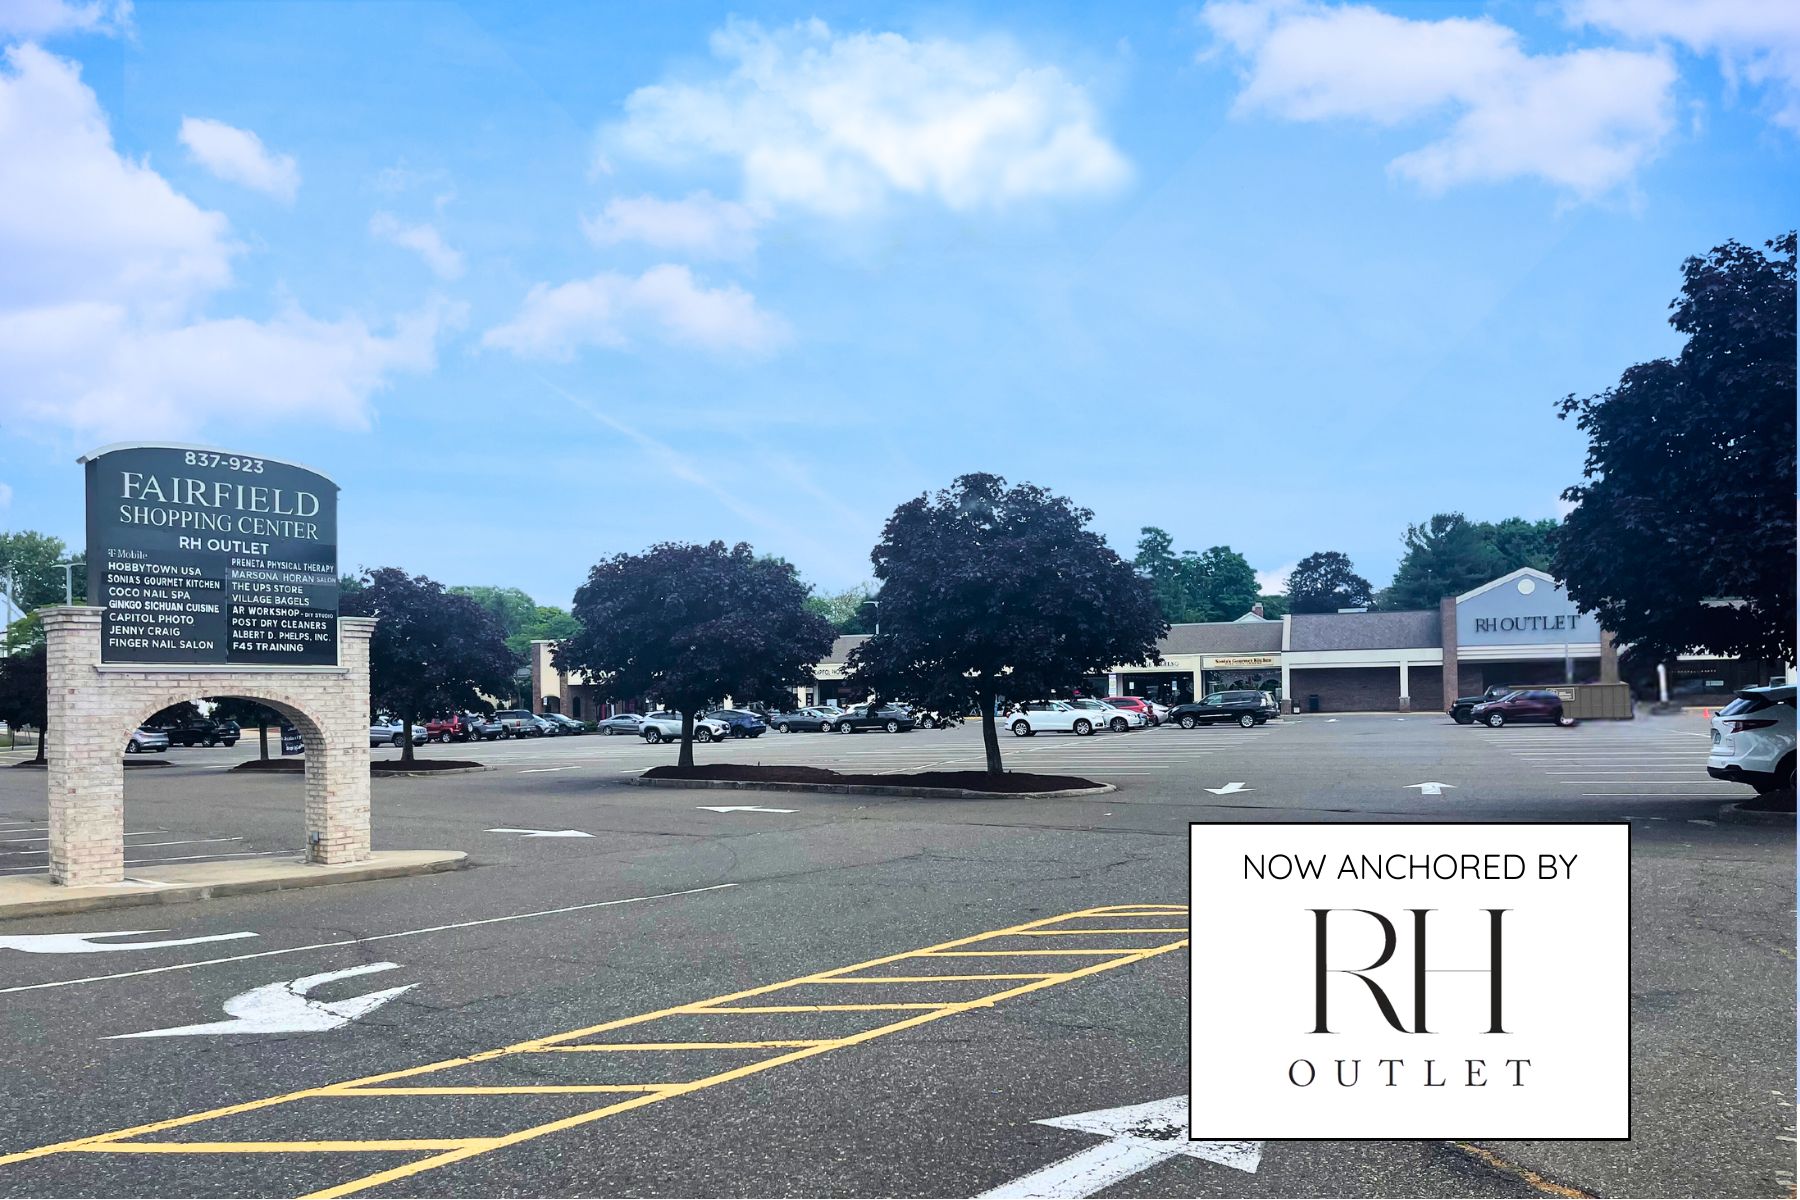 Retail Store for Lease in the Fairfield Shopping Center